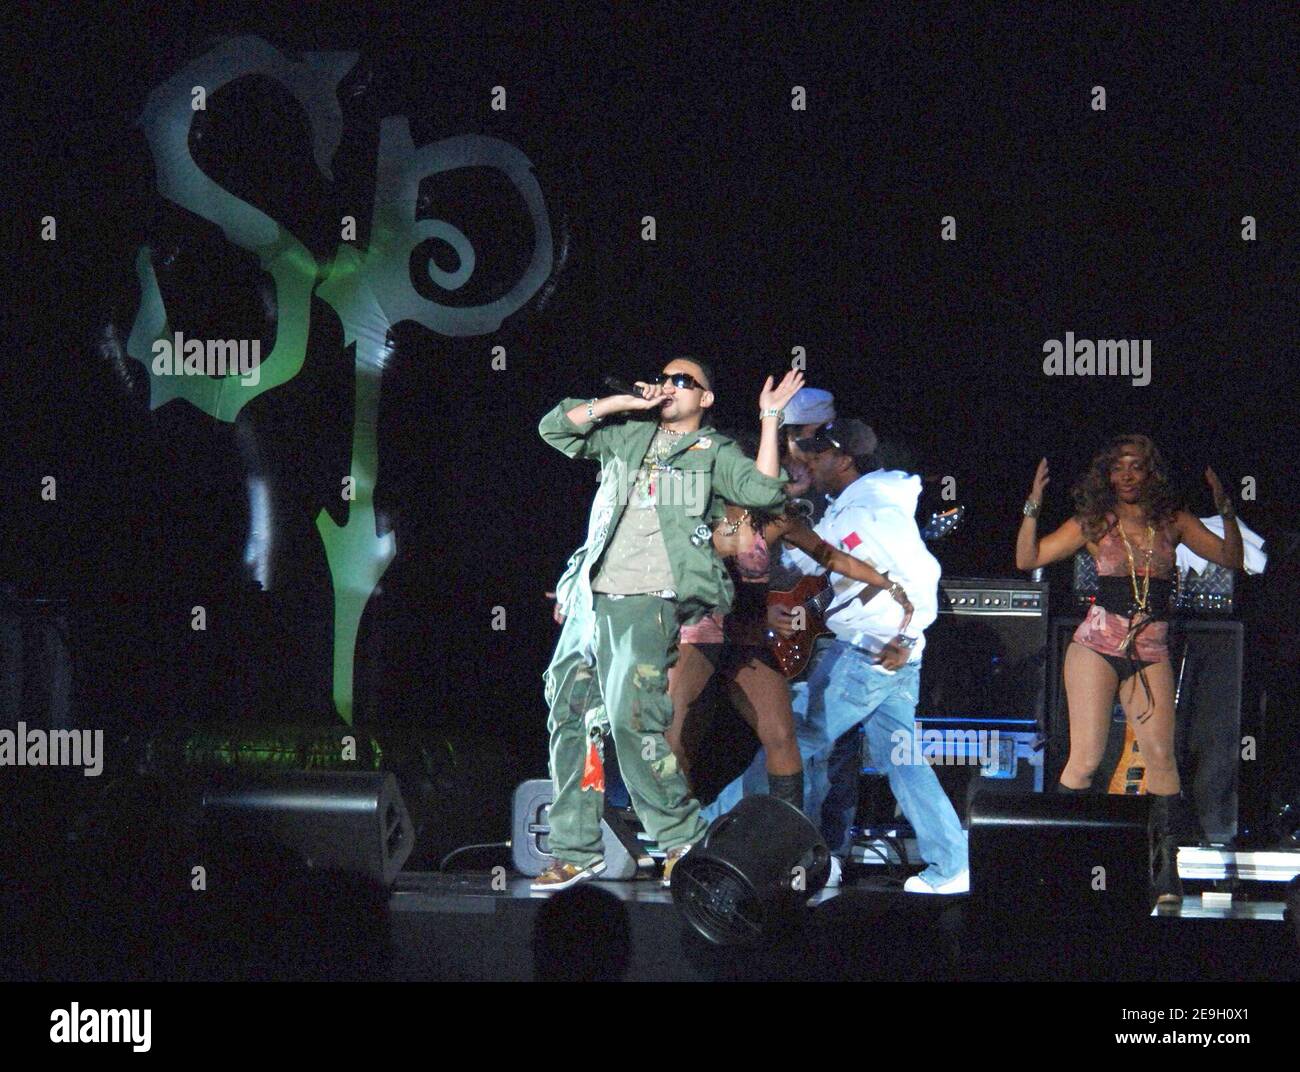 Sean Paul performs as the opening act during the 'Mariah Carey: The Adventures of Mimi: the Voice, the Hits, the Tour' show held at the Madison Square Garden, in New York, NY, USA on Wednesday, August 23, 2006. Photo by David Miller/ABACAPRESS.COM Stock Photo